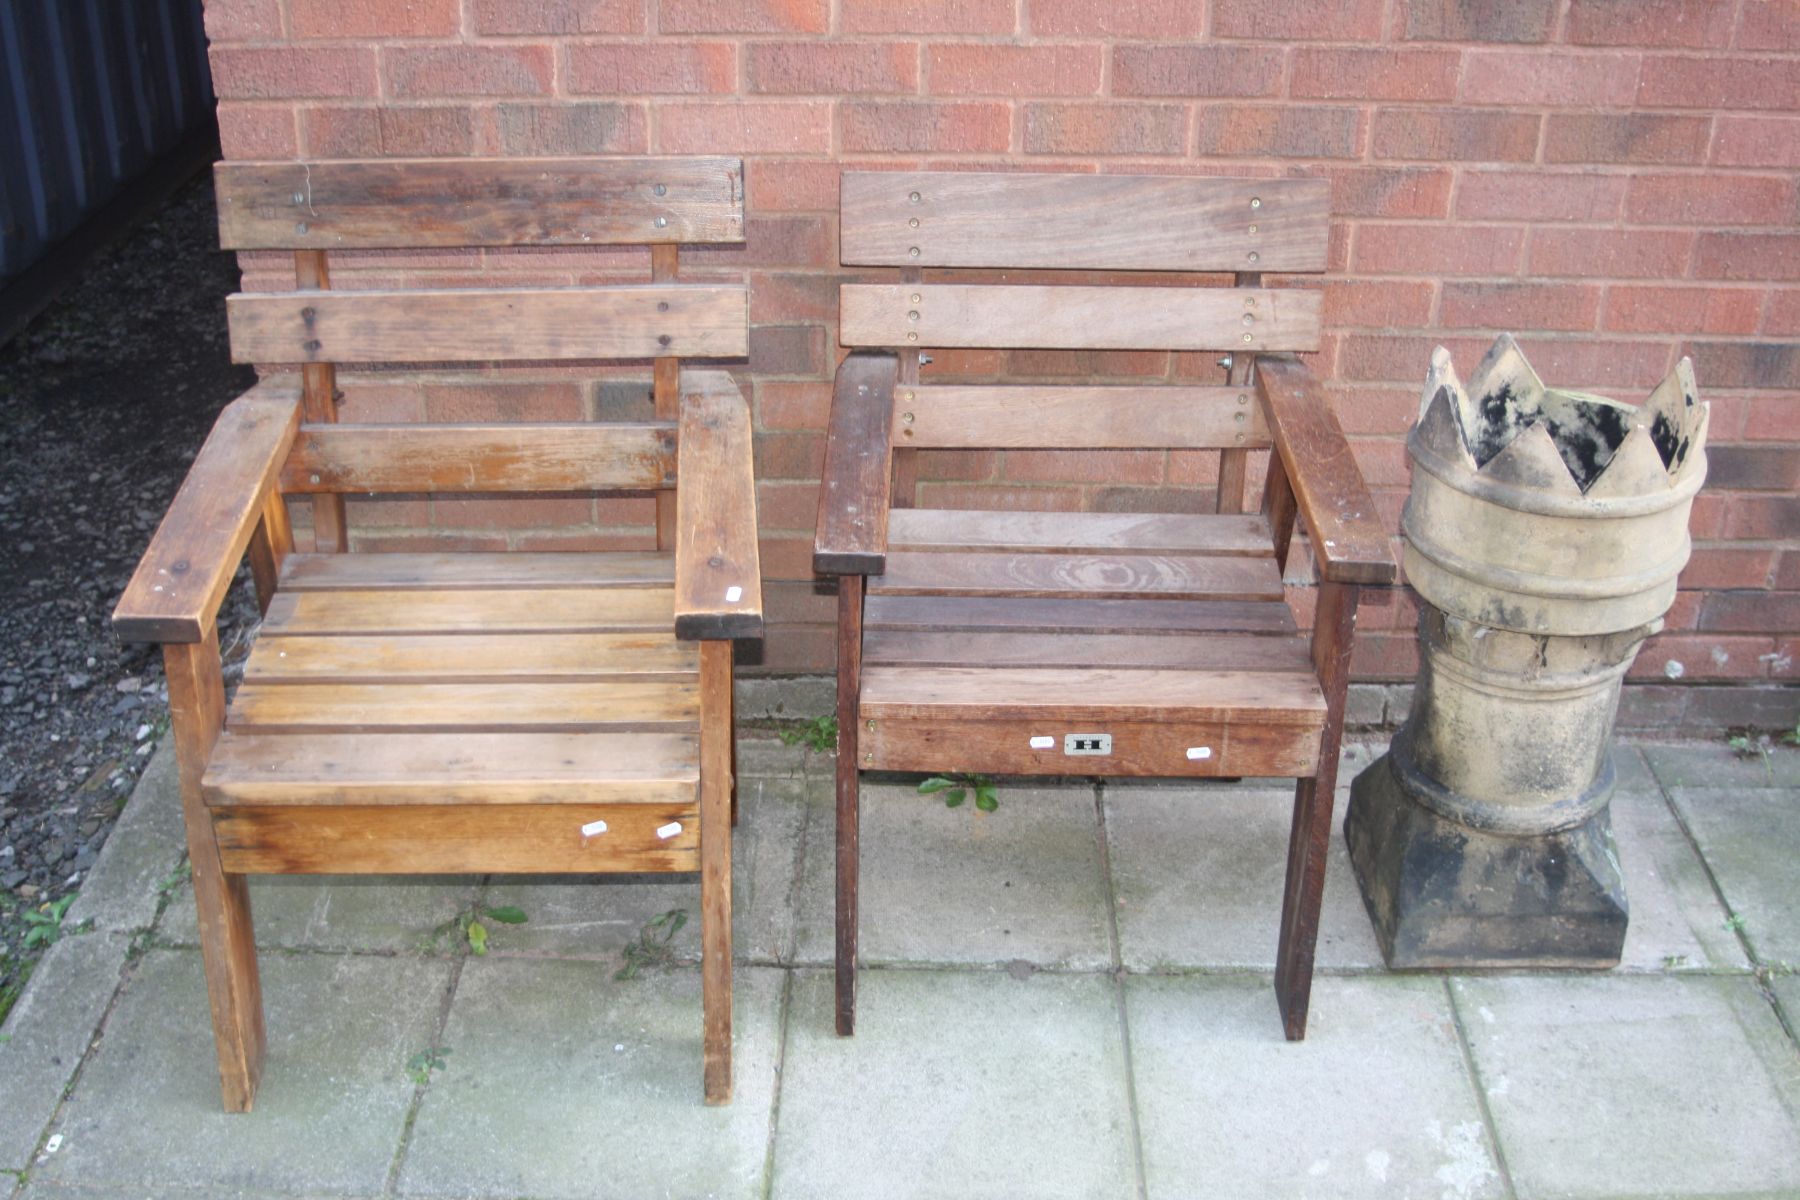 A HATTERSLEY KEIGHLEY TEAK GARDEN CHAIR, width 61cm x depth 62cm x height 84cm and another similar